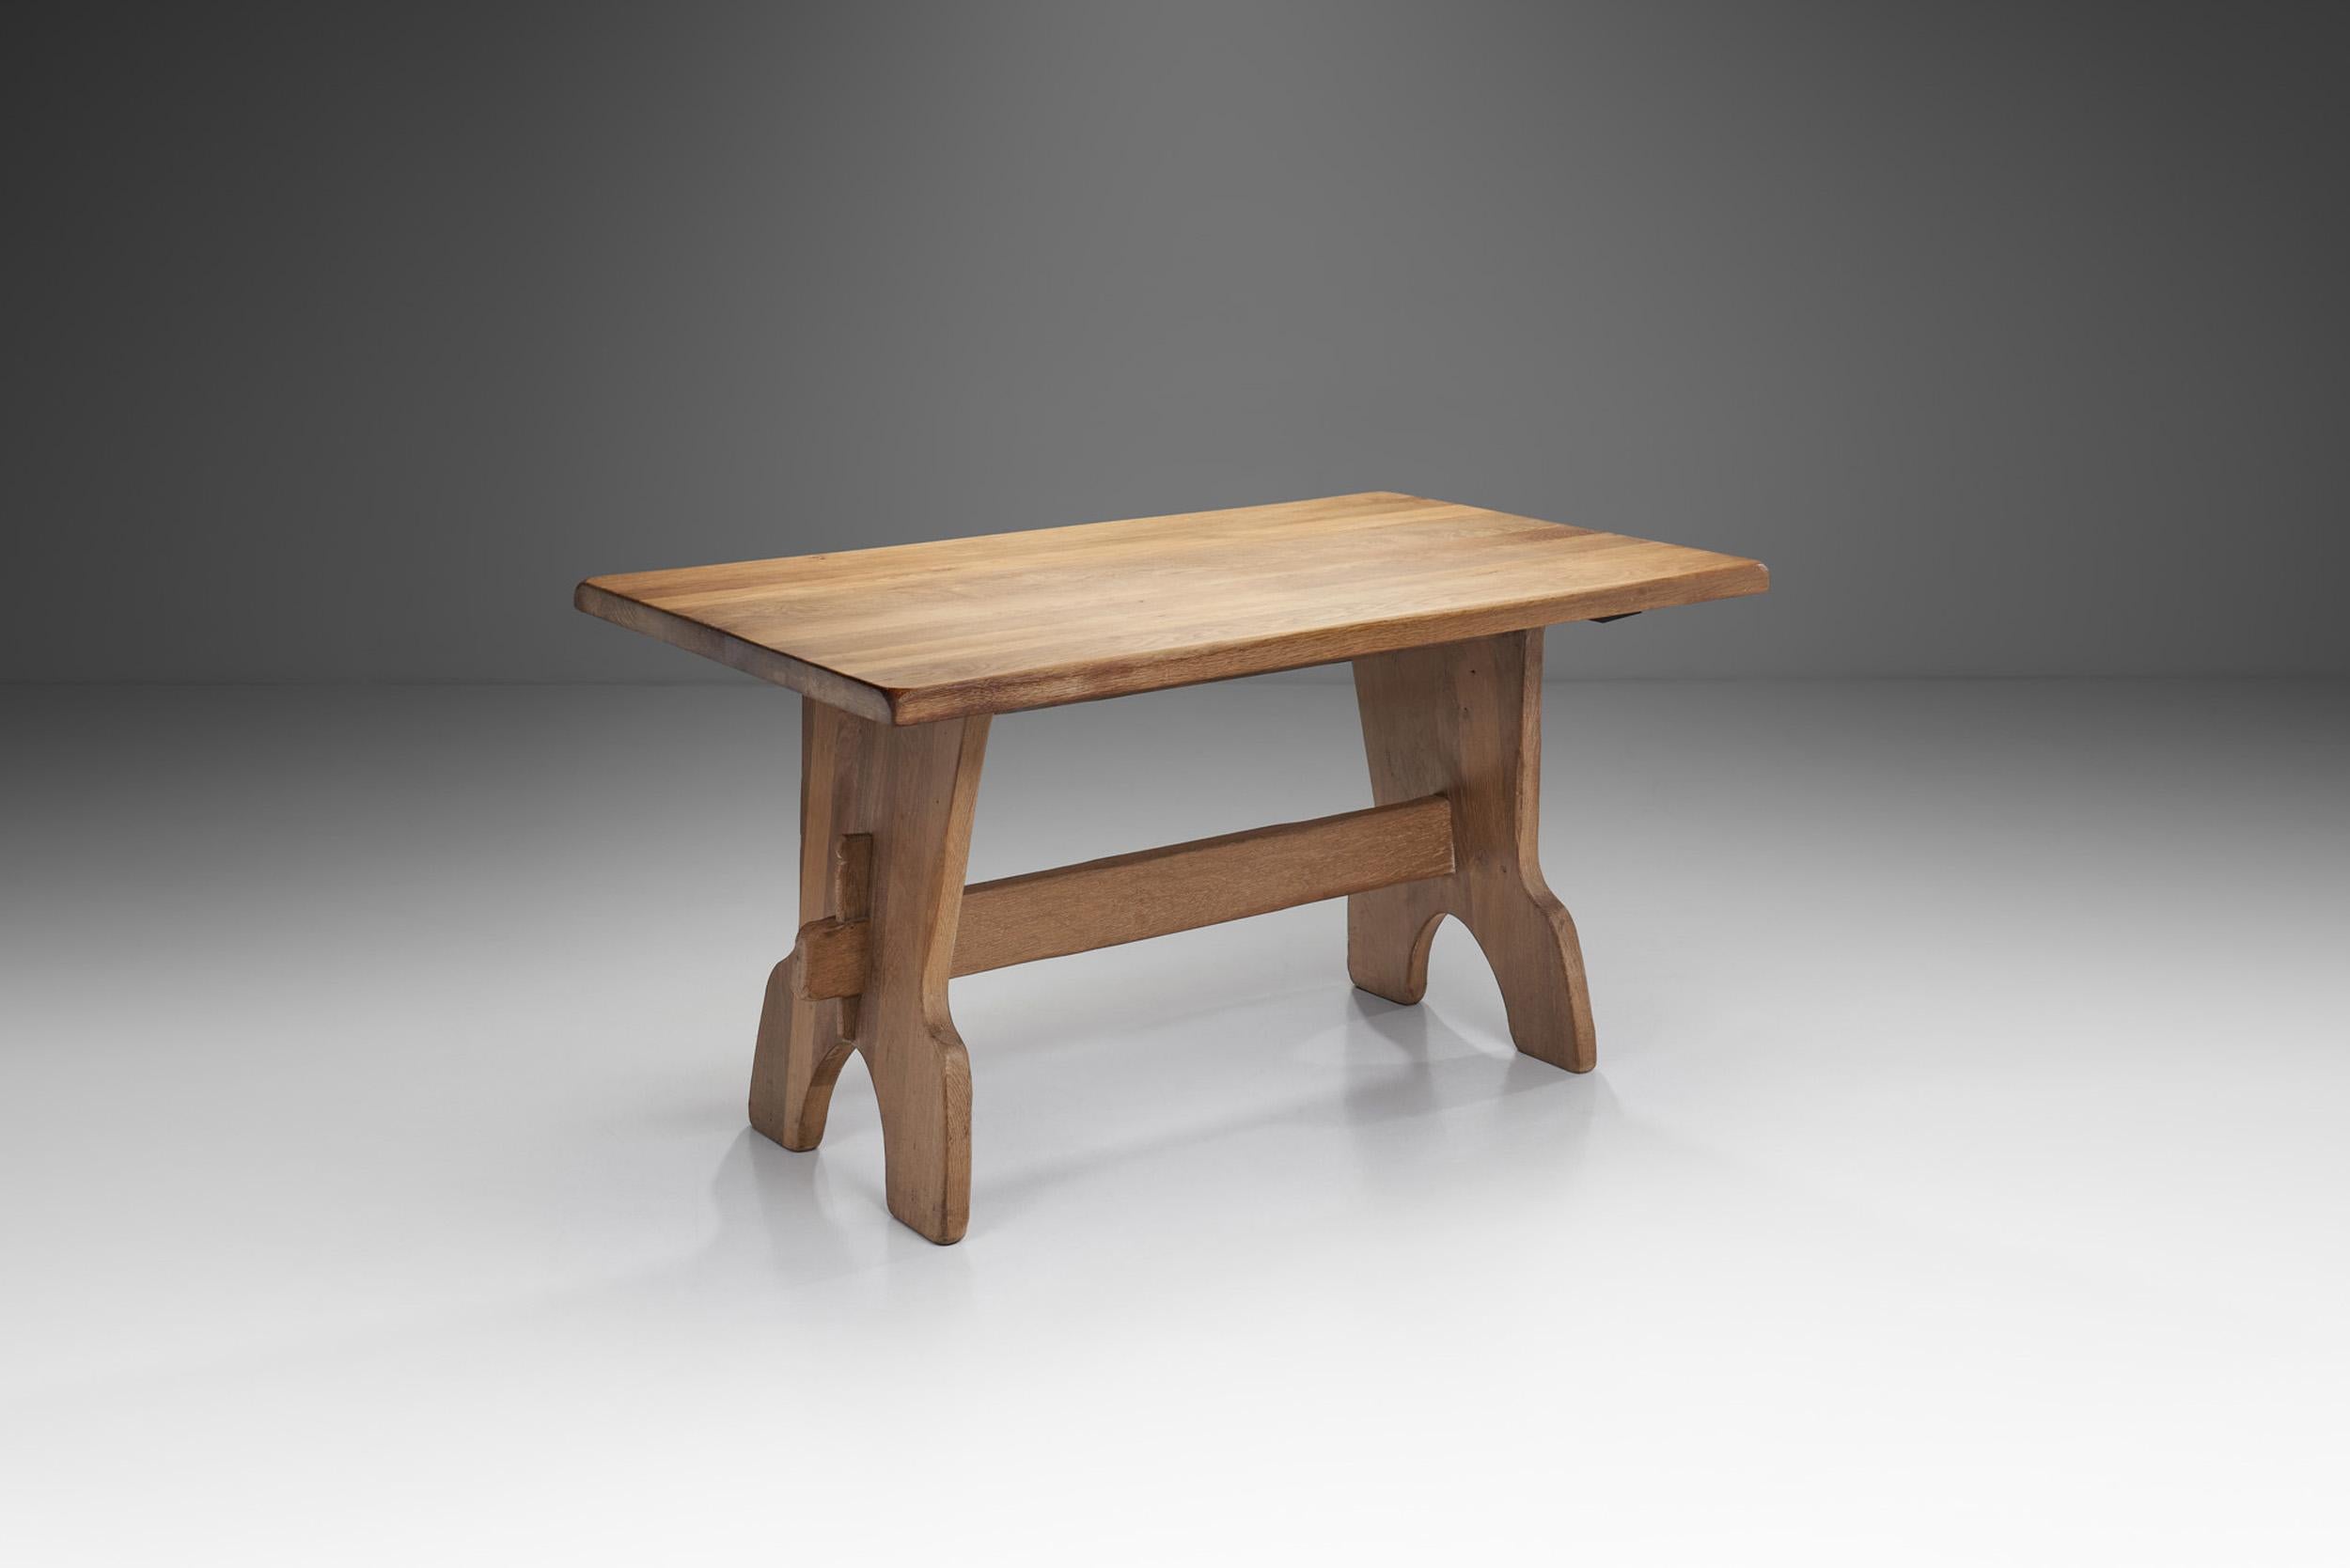 This Belgian table was created with considerable technical expertise and holds a natural expression with its airy and organic design, which is dominated by the natural beauty of the material and the creative use of the tenon and mortise